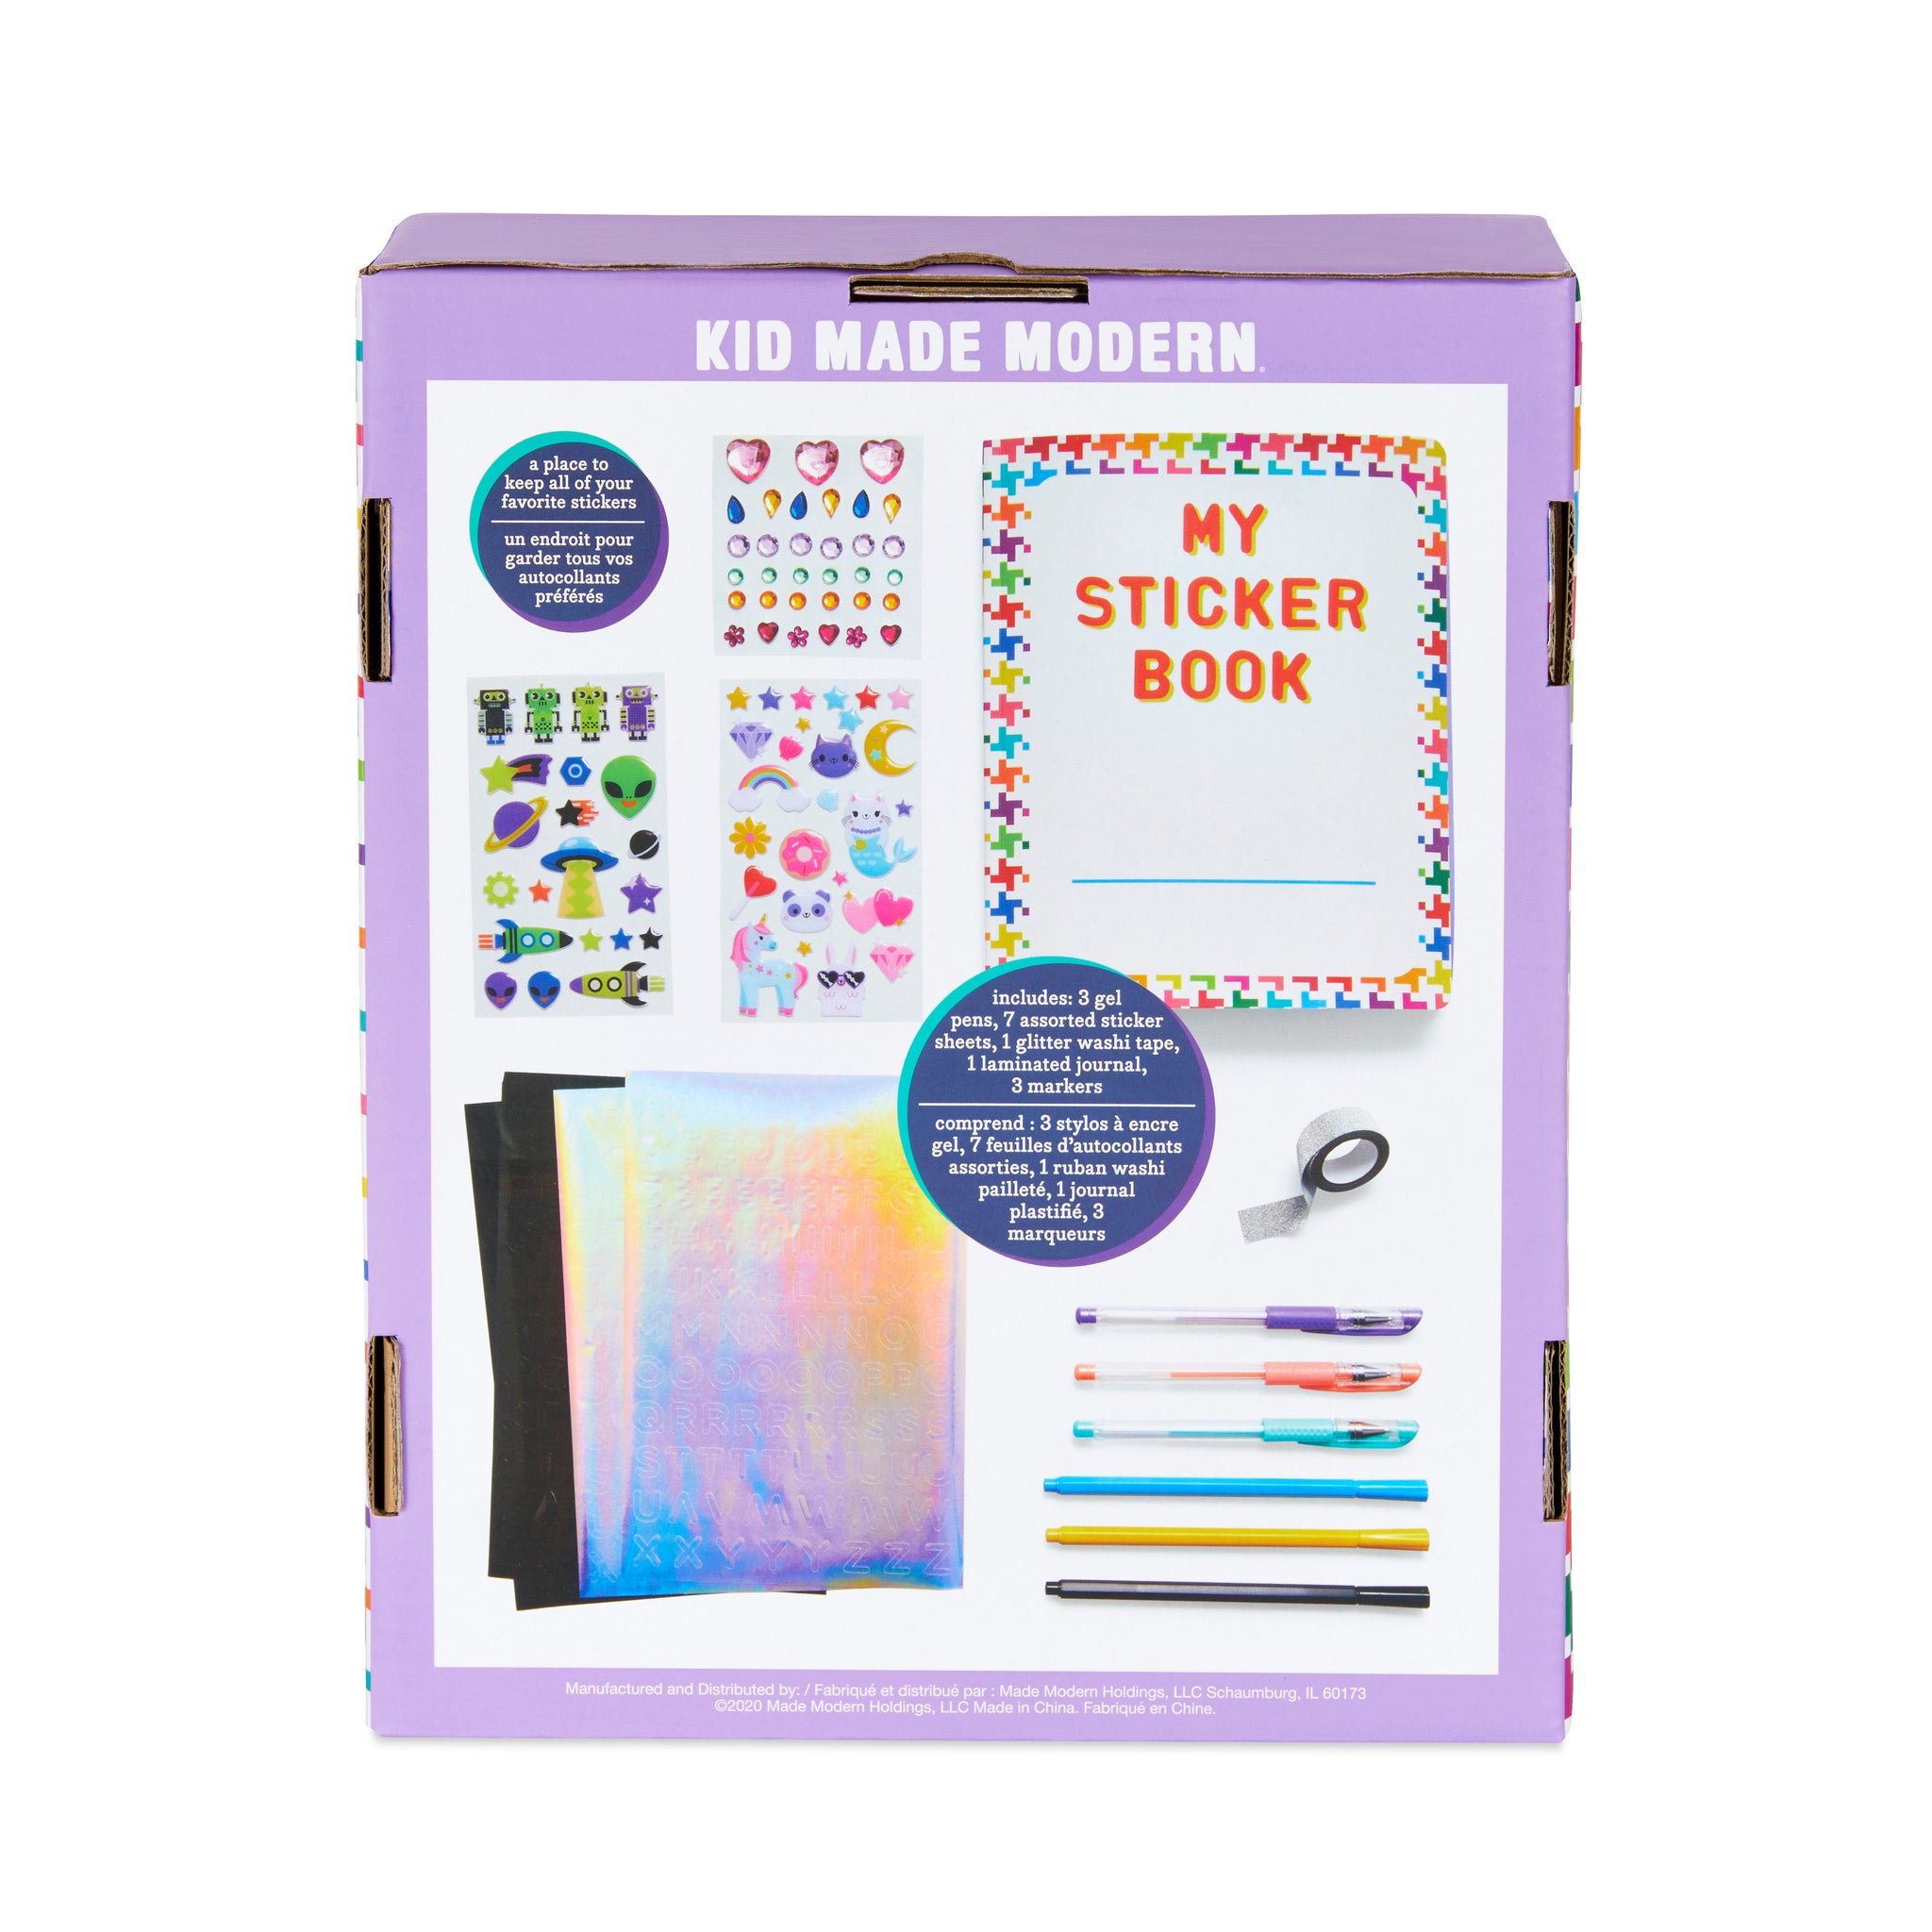 Kid Made Modern Sticker Collecting Album – Hotaling